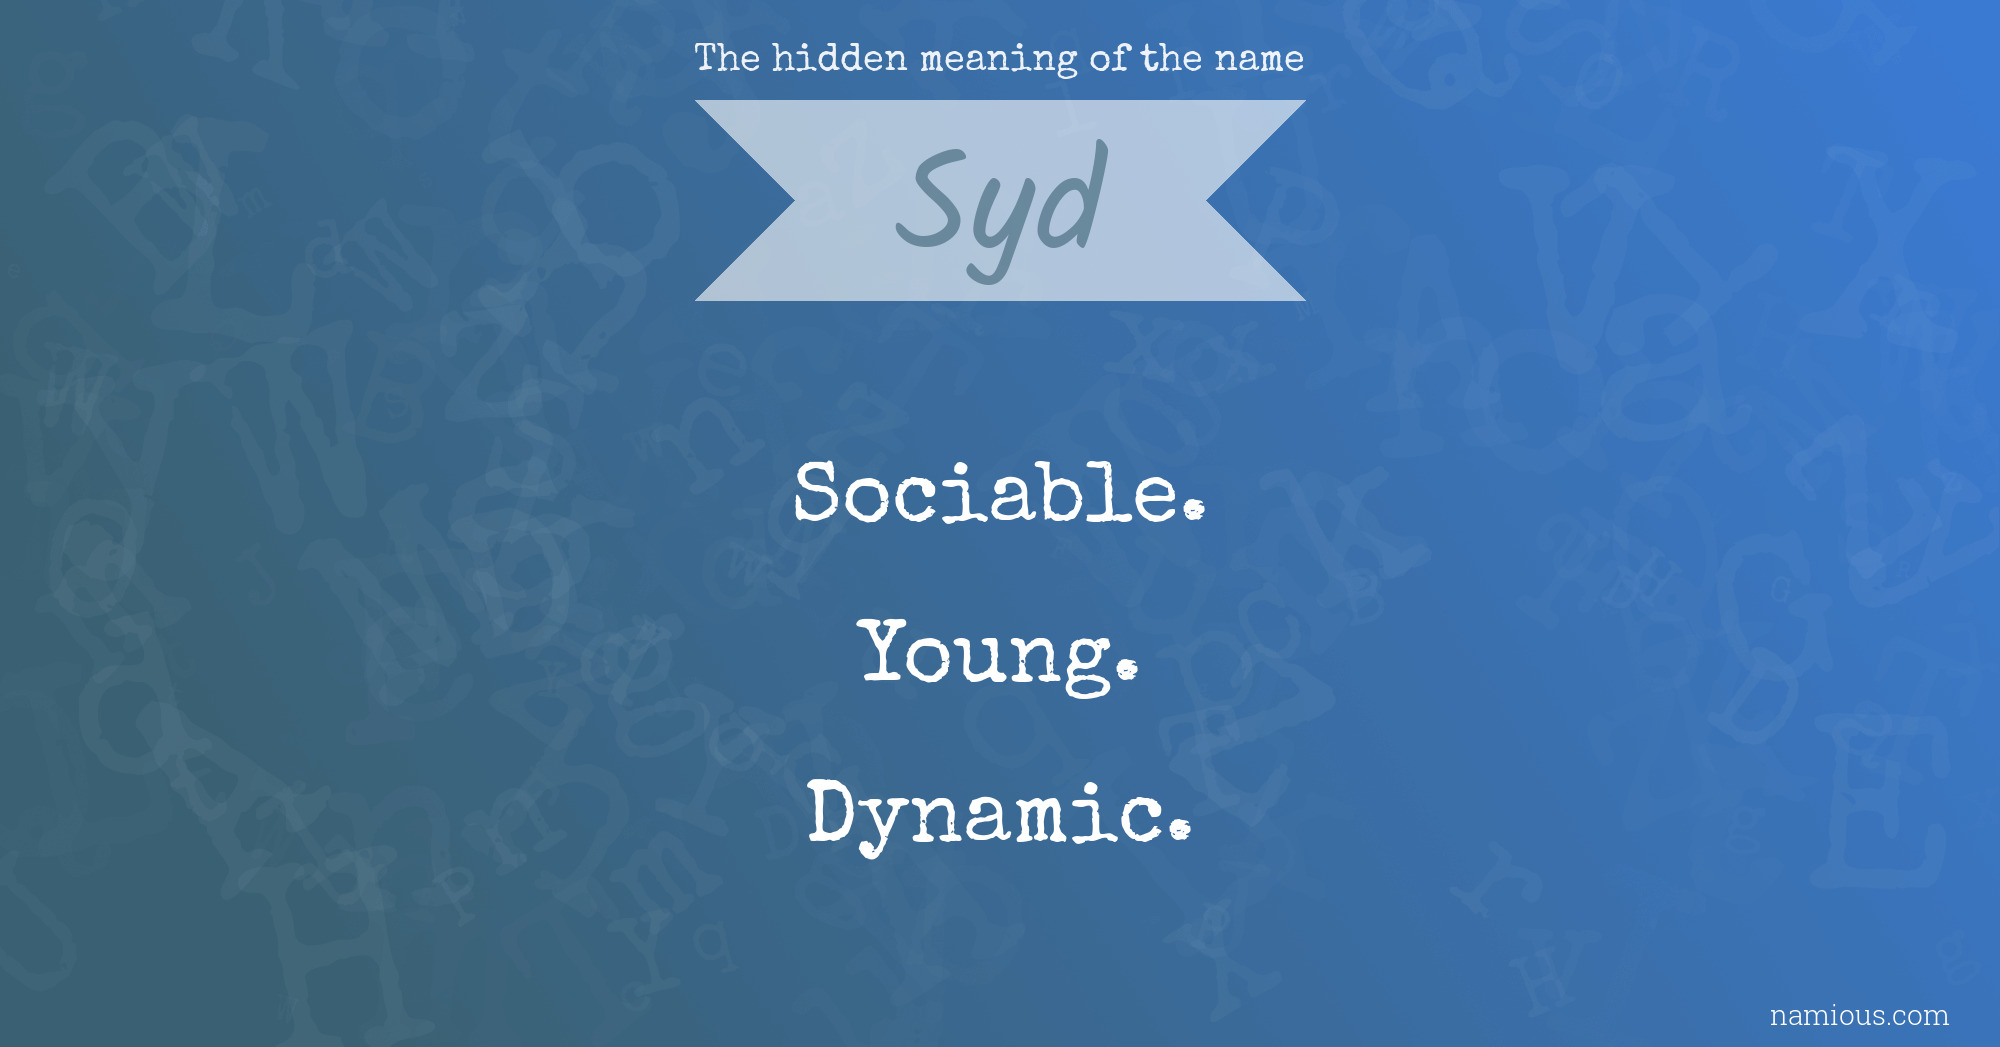 The hidden meaning of the name Syd